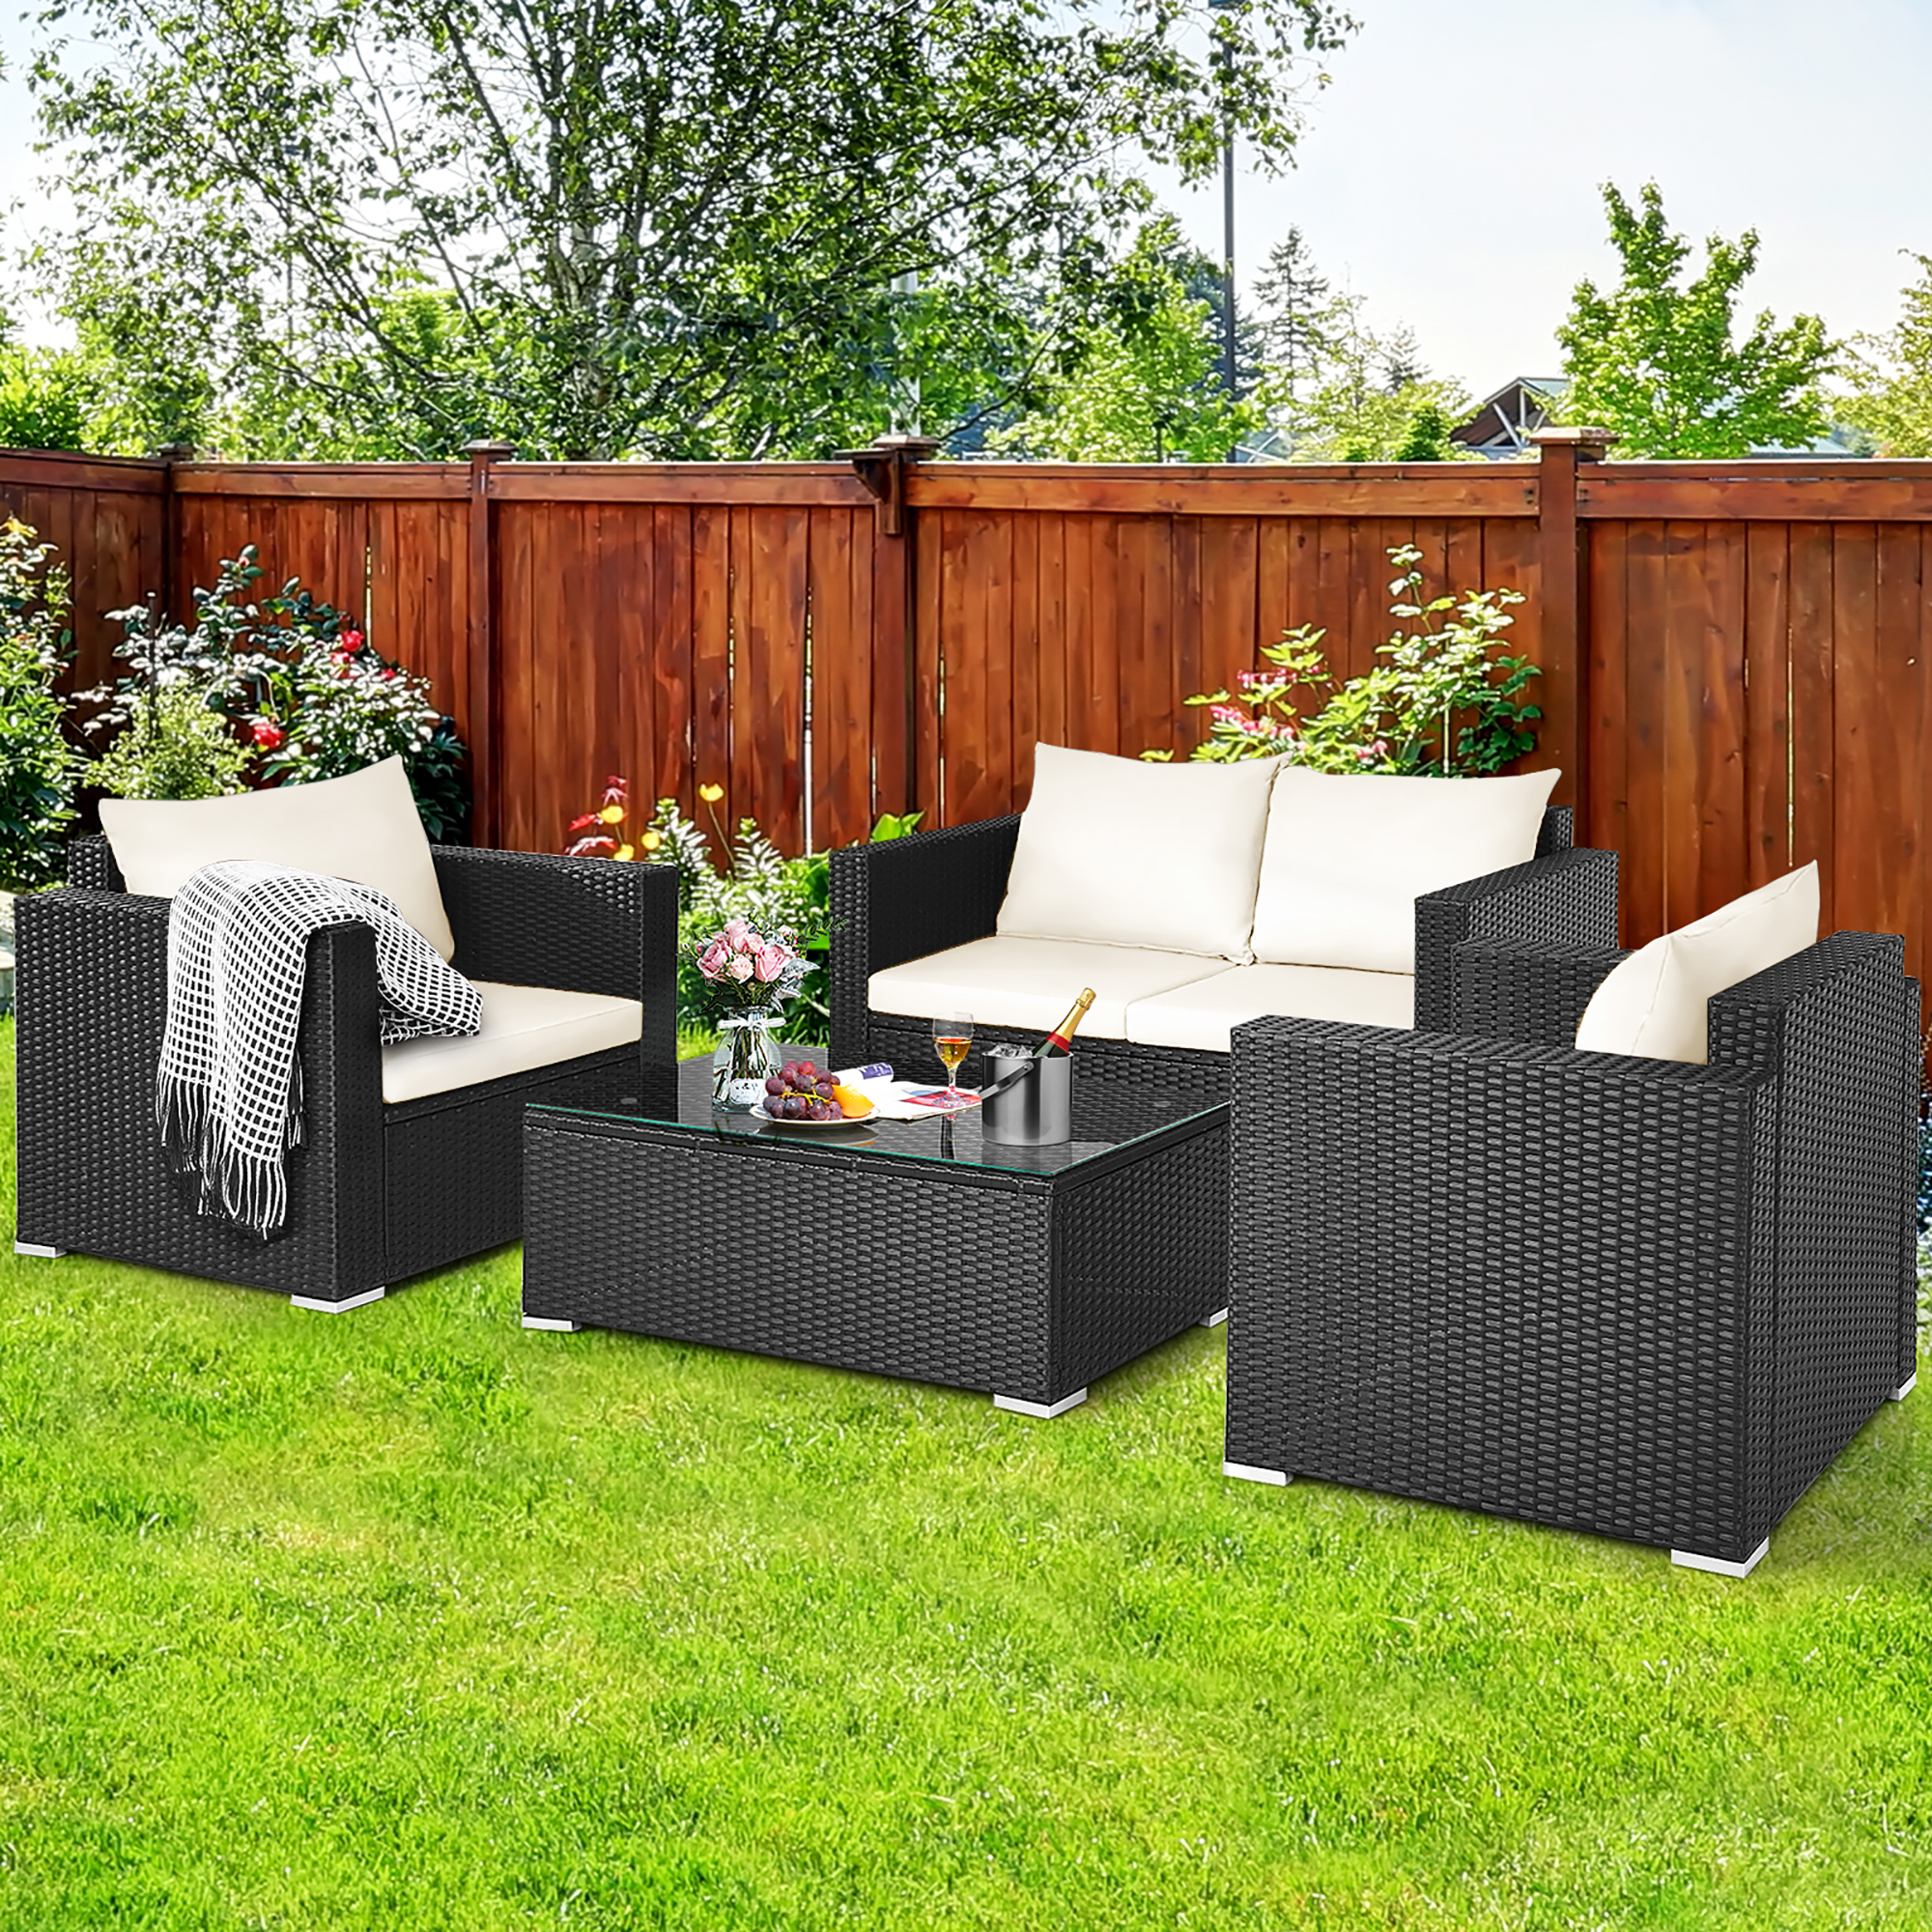 Costway 4PCS Patio Rattan Furniture Set Cushioned Sofa Chair Coffee Table Off White - image 2 of 9